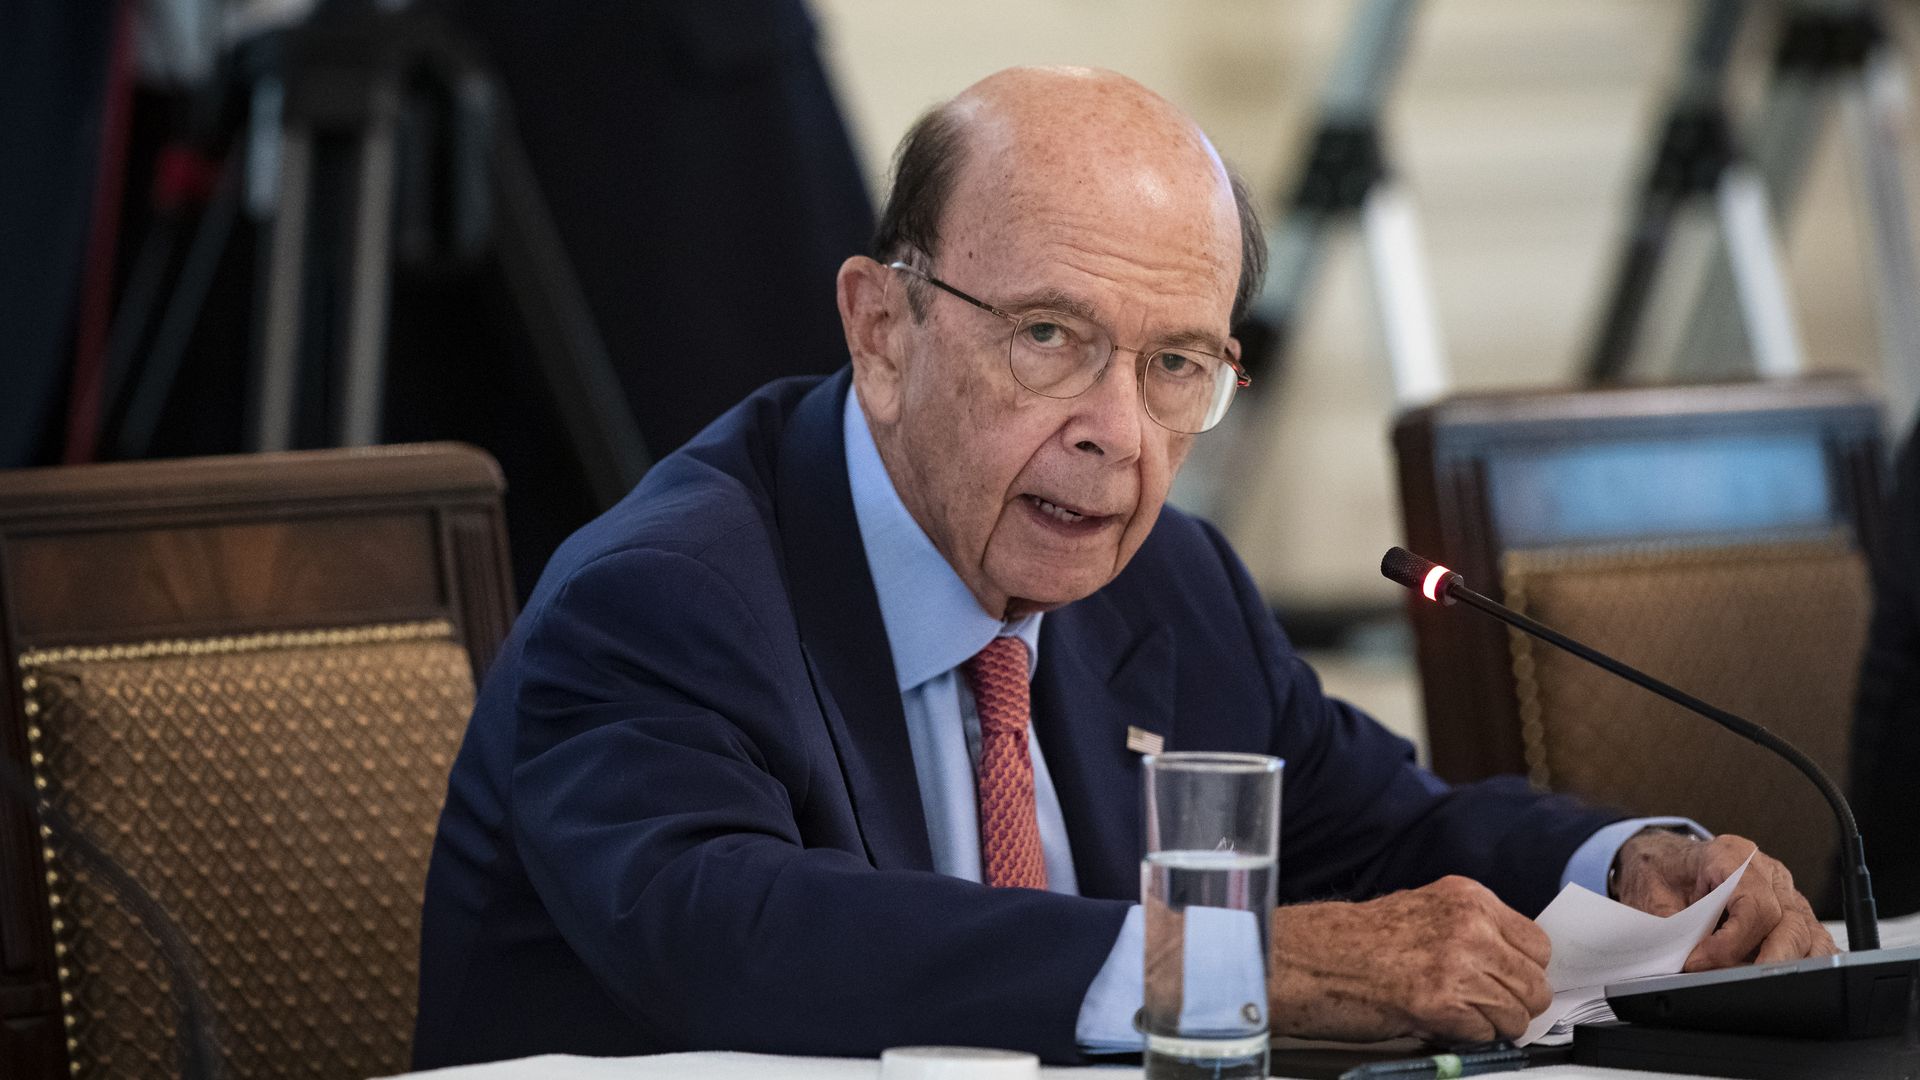 Photo of Wilbur Ross sitting at a table and speaking